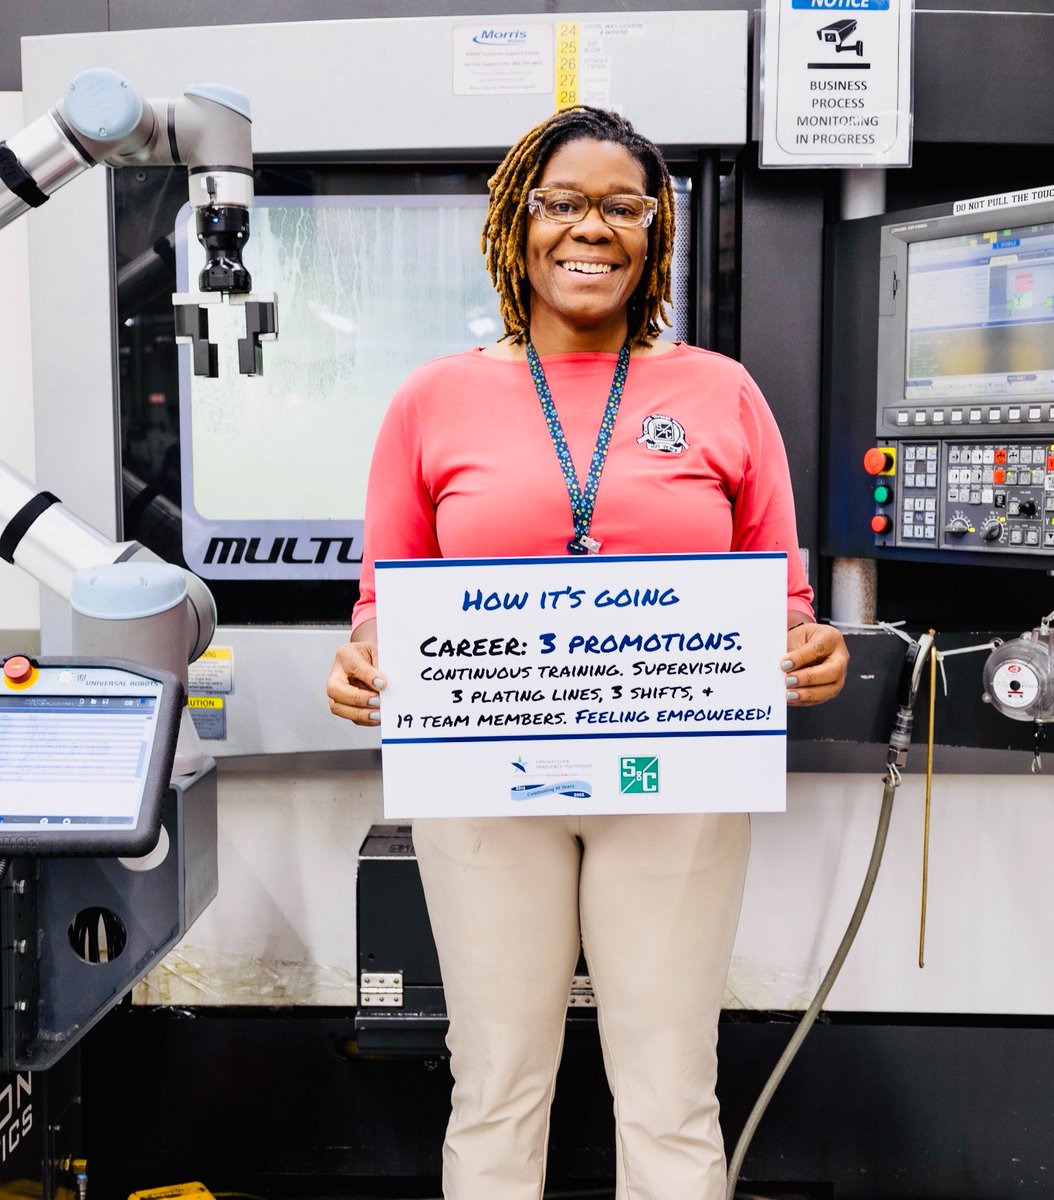 Meet some of the people from @SandCElectric! Ivy T. says that she likes learning how things are made. Over the past 12 months, there have been nearly 60,000 job postings in the manufacturing sector in @cookcountygov alone. Chicookworks.org #HowItStarted #HowItsGoing